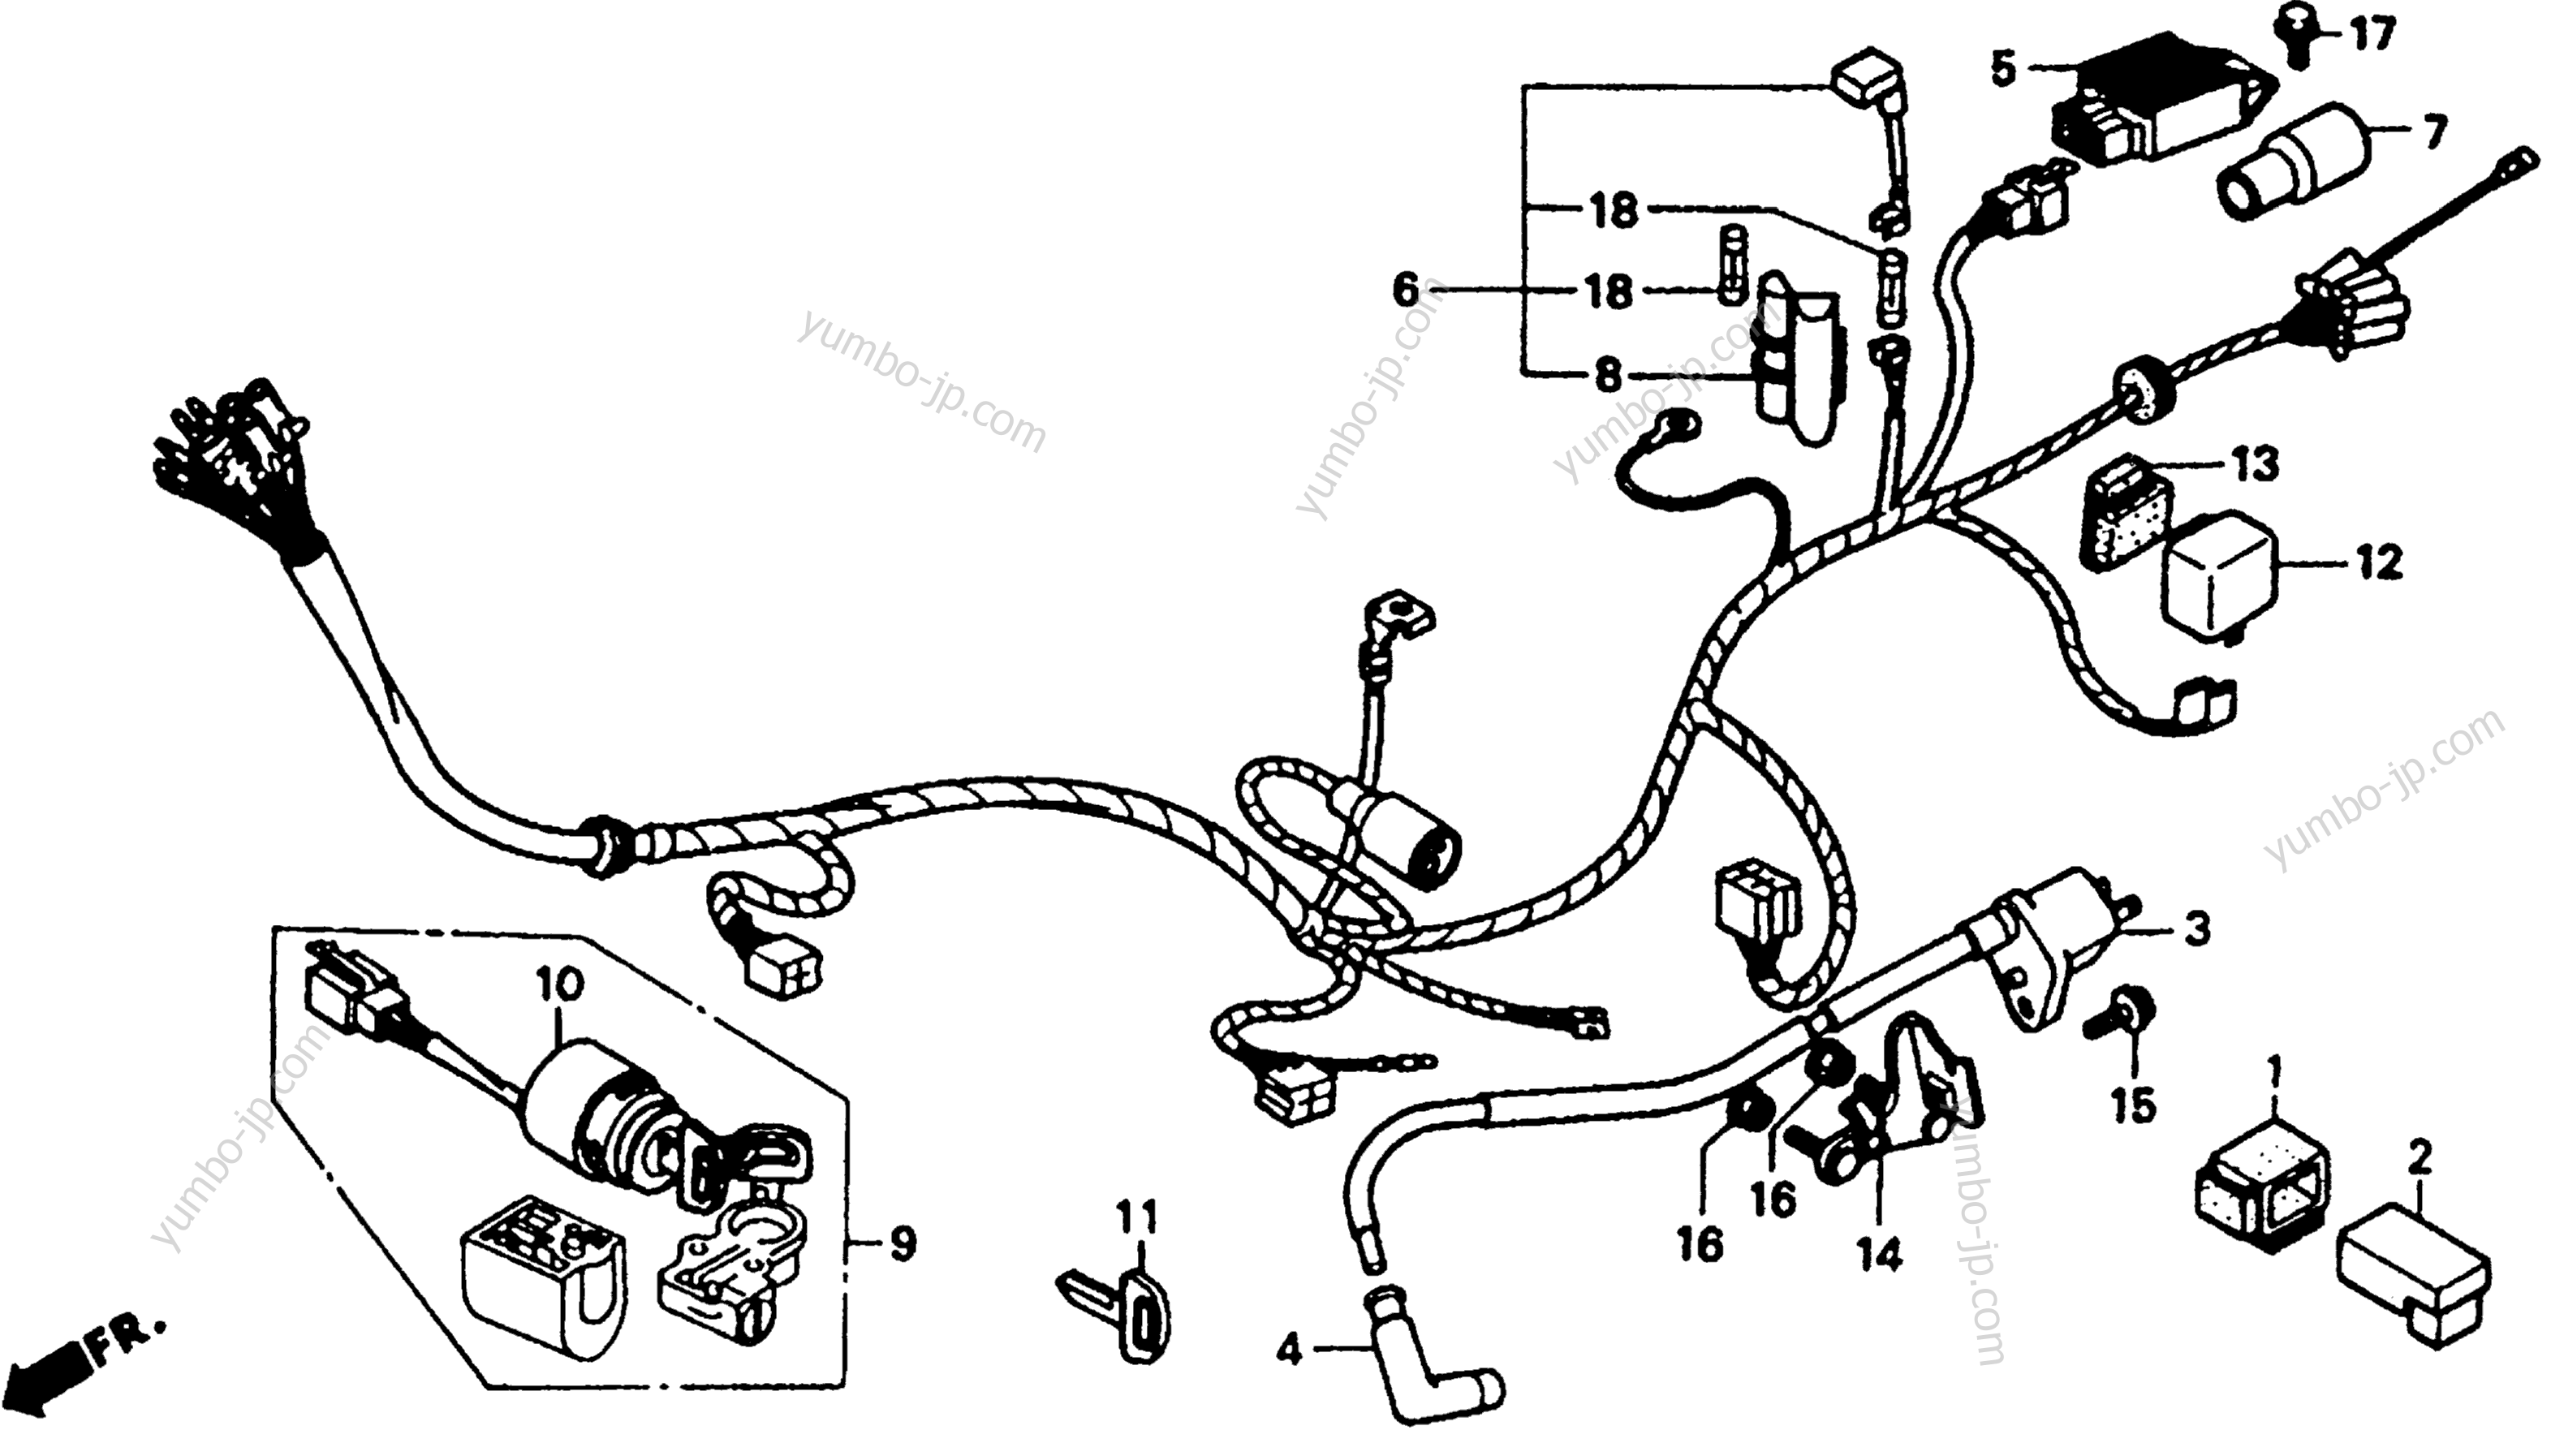 WIRE HARNESS for motorcycles HONDA CT70 AC 1994 year